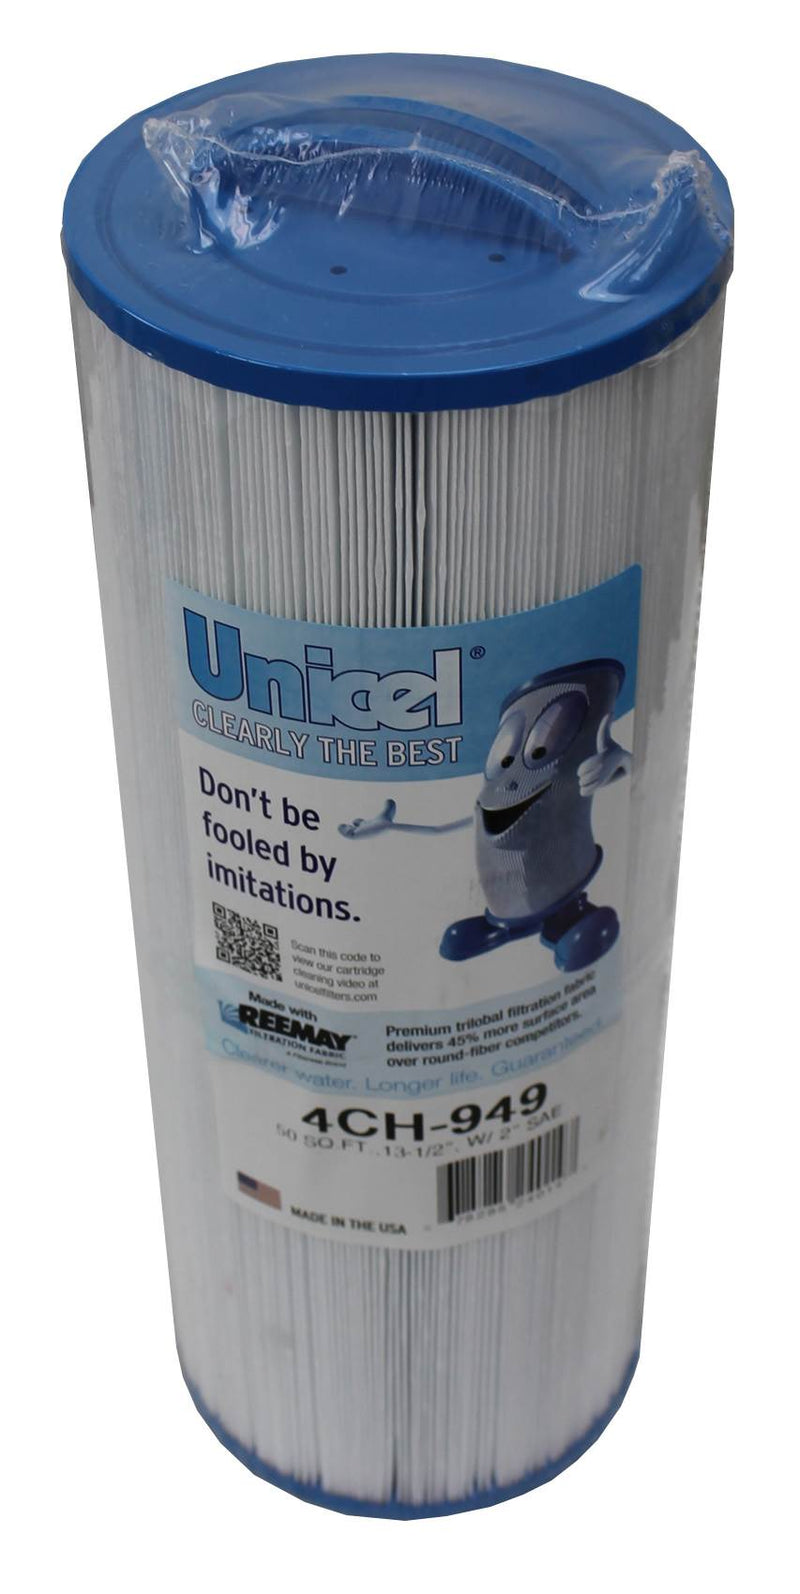 Unicel 4CH-949 Swimming Pool Spa Waterway Replacement Filter Cartridge (6 Pack)